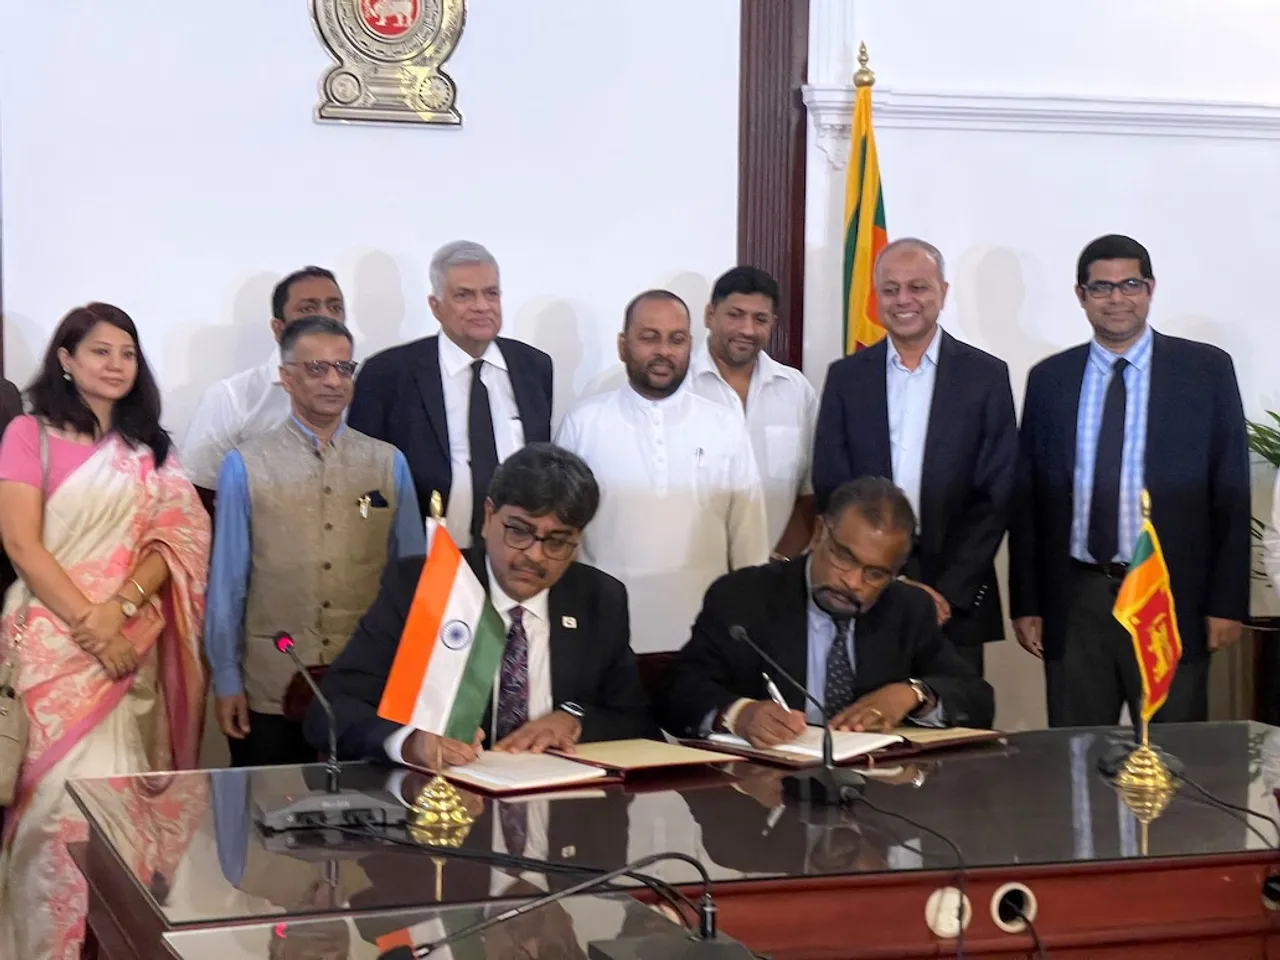 LOC Agreement of USD 55 mn was signed by Government of the Socialist Republic of Sri Lanka and India Exim Bank in in the presence of the Prime Minister of Sri Lanka